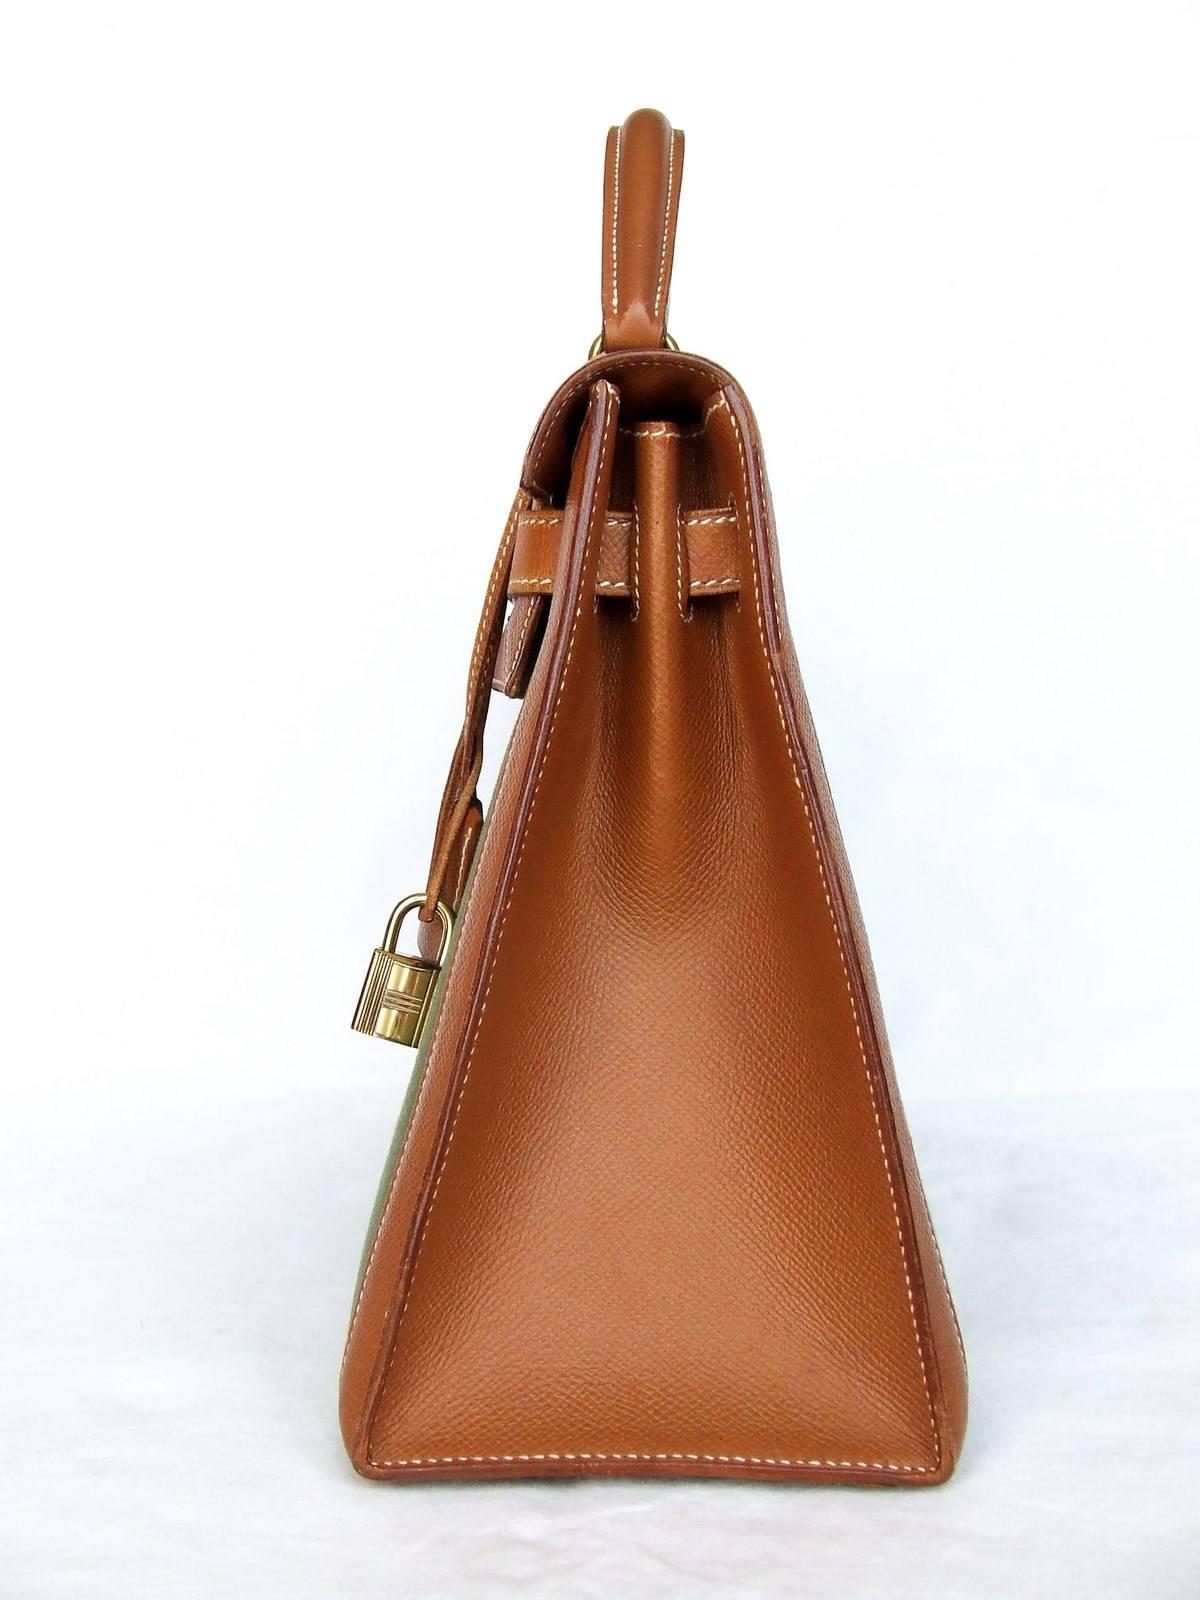 Very rare colorway for an Authentic Hermes Handbag

"KELLY"

Sellier version (stitching outside)

Rigid bag, which makes it very classy

Made in Fance

Stamp X in a circle

Made of Canvas and Leather, Golden Hardware

Colorway: Cognac